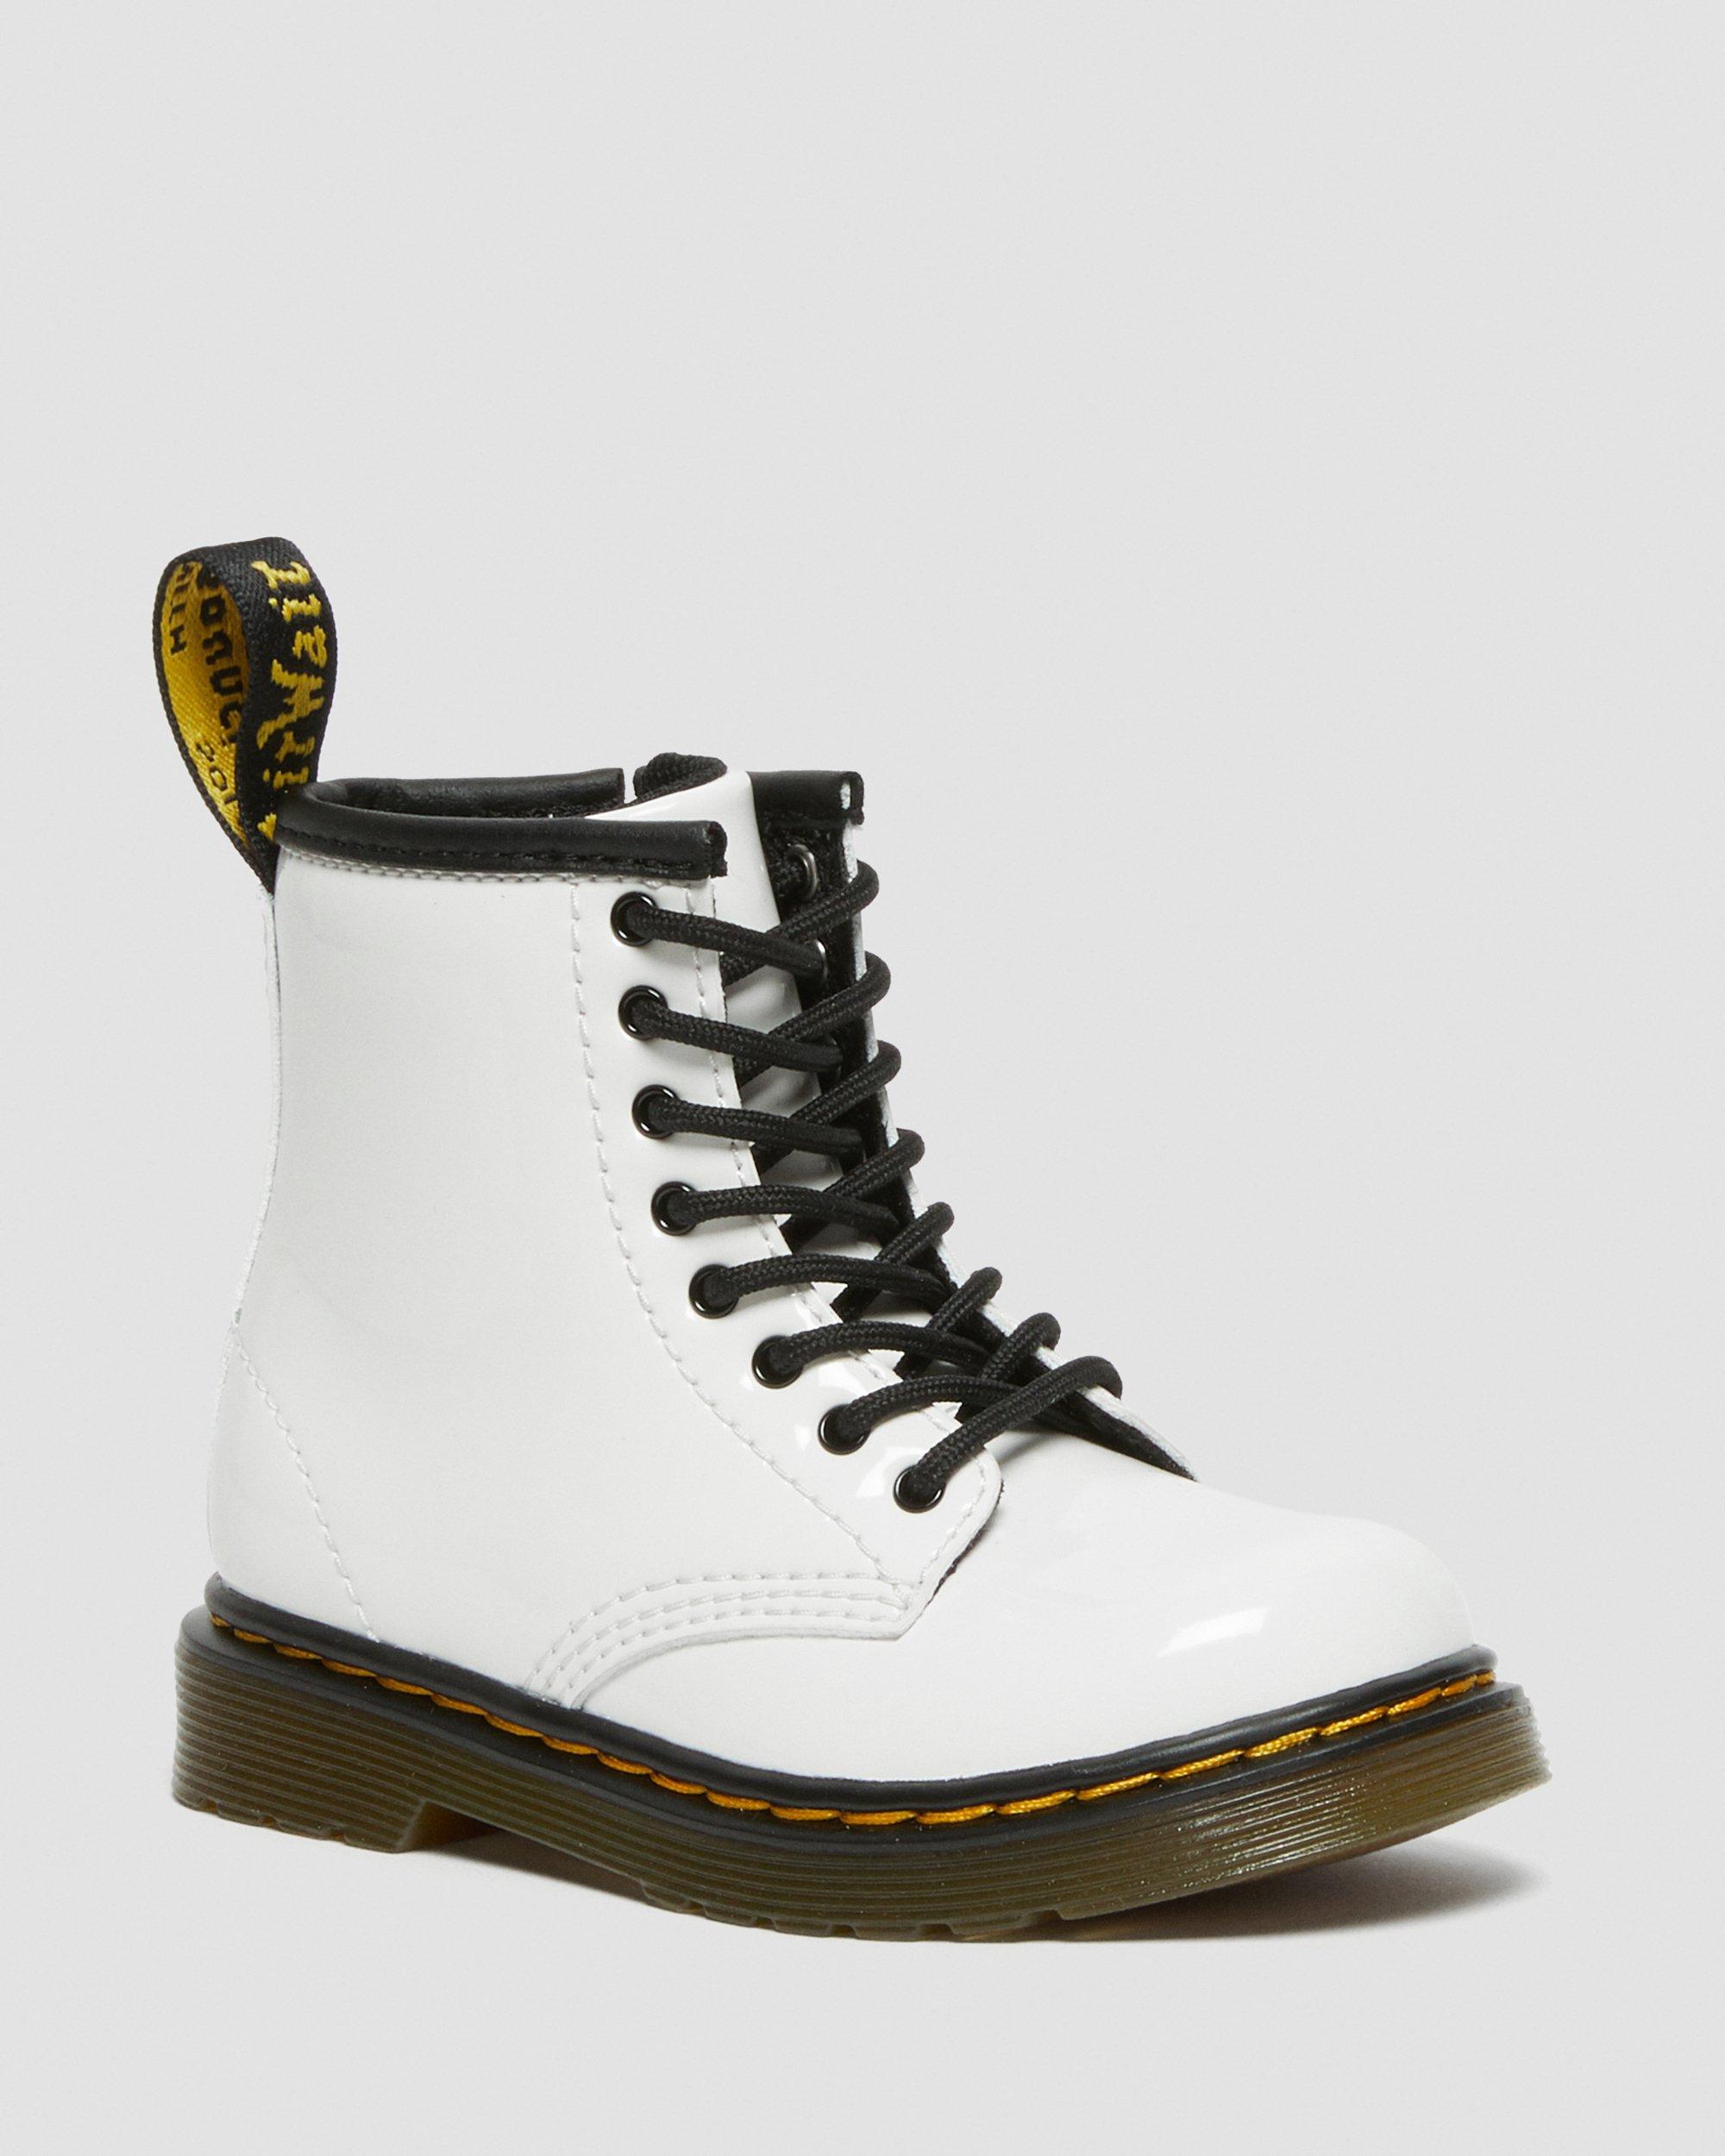 Toddler 1460 Patent Leather Lace Up Boots | Dr. Martens